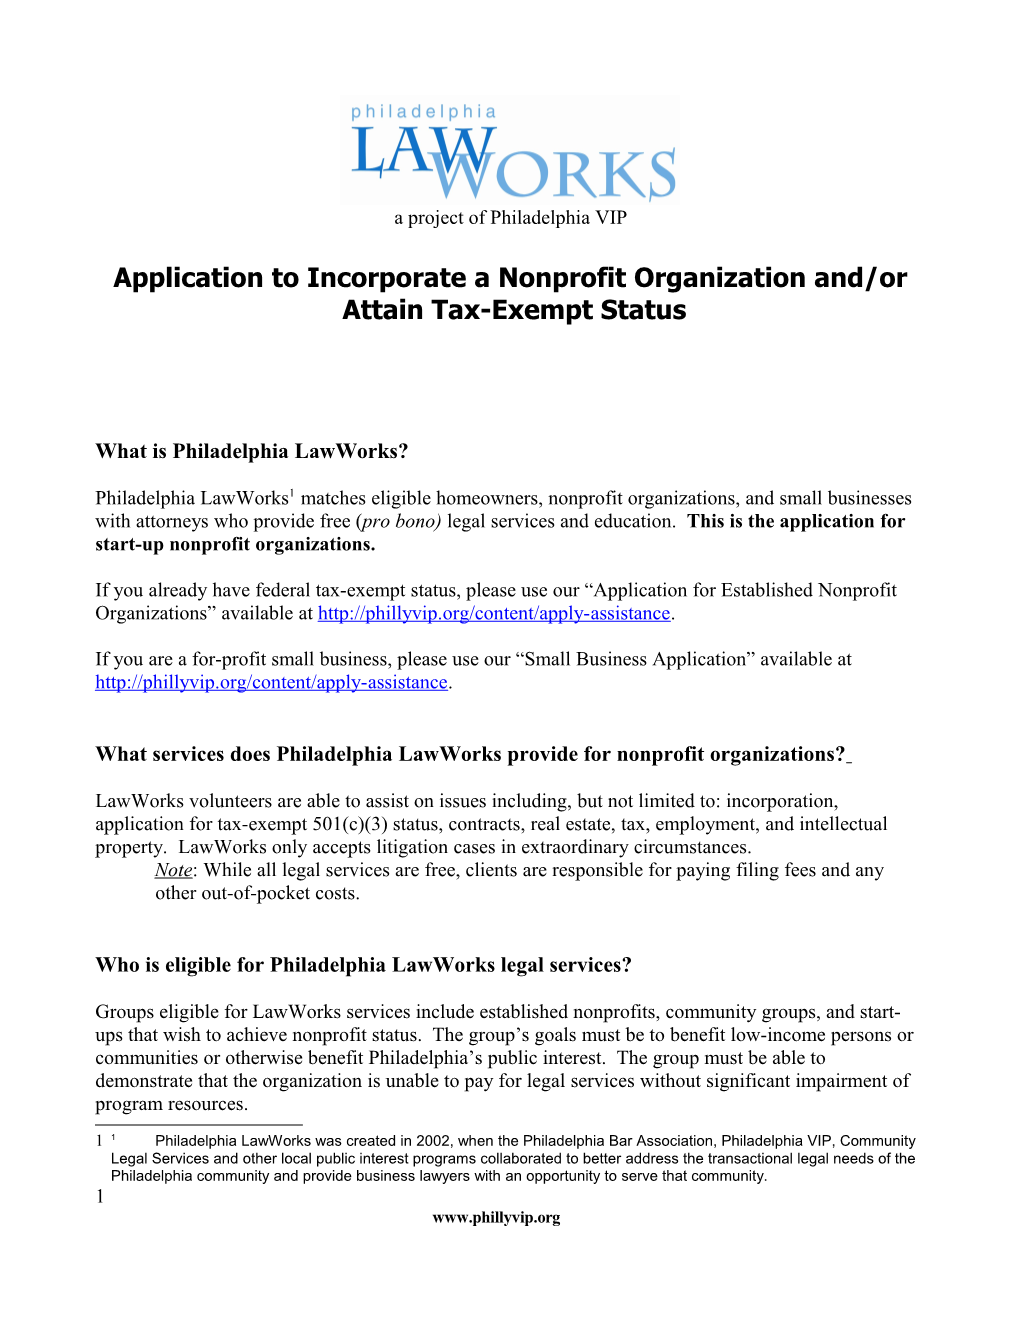 What Is Lawworks